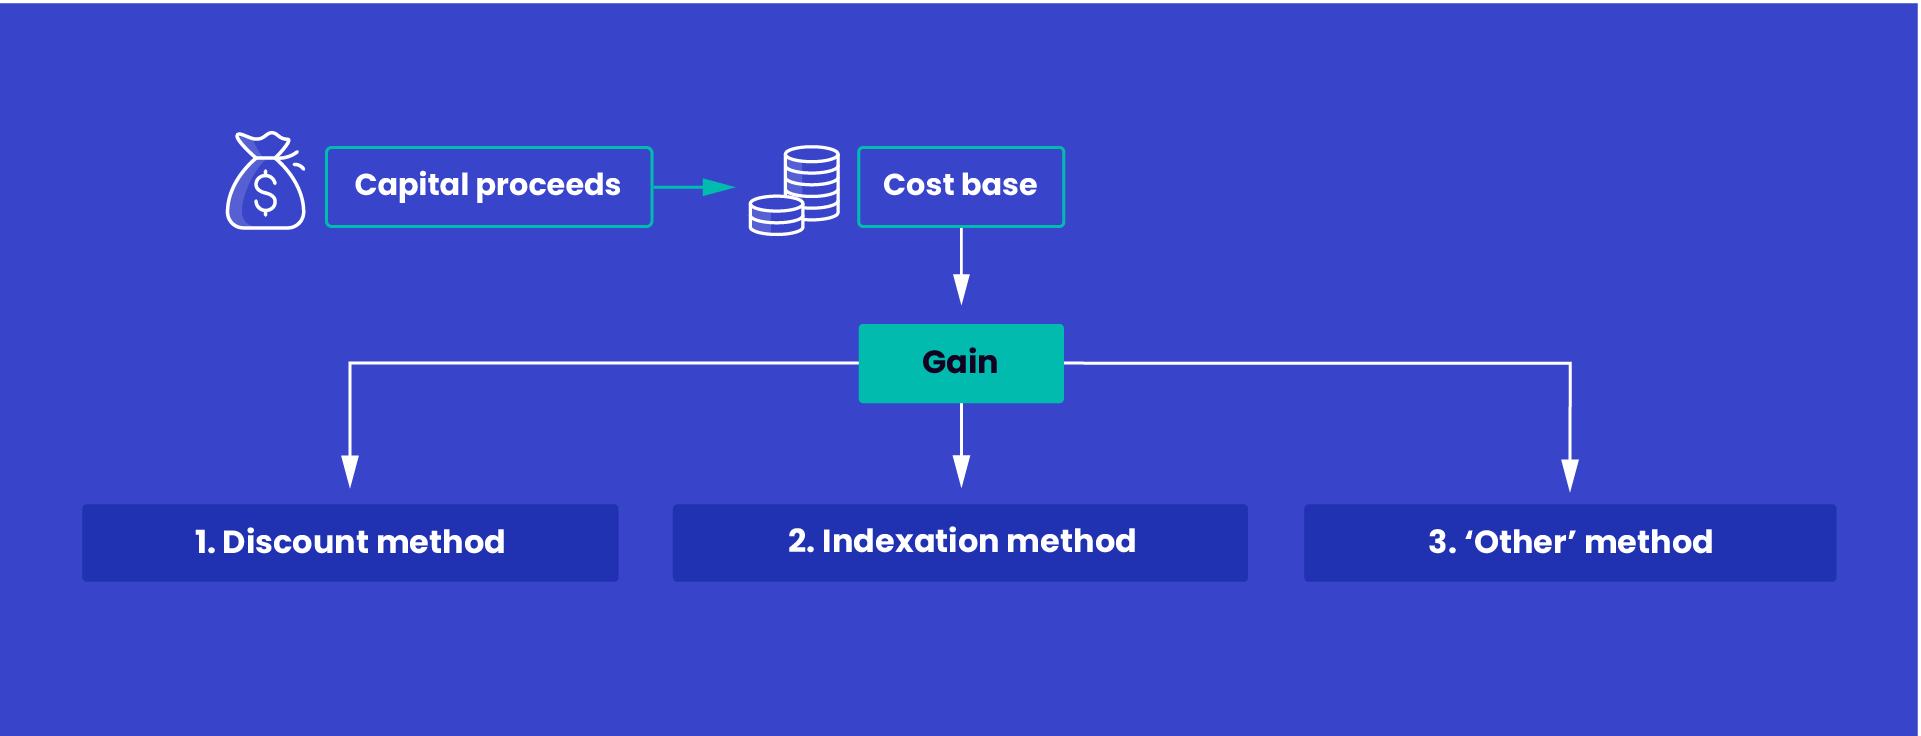 Diagram representing how a capital gain is calculated. It shows that once you’ve calculated your capital processed and cost base, you use one of the 3 calculation methods to calculate your gain. The 3 calculation methods are the discount method, the indexation method and the ‘other’ method.